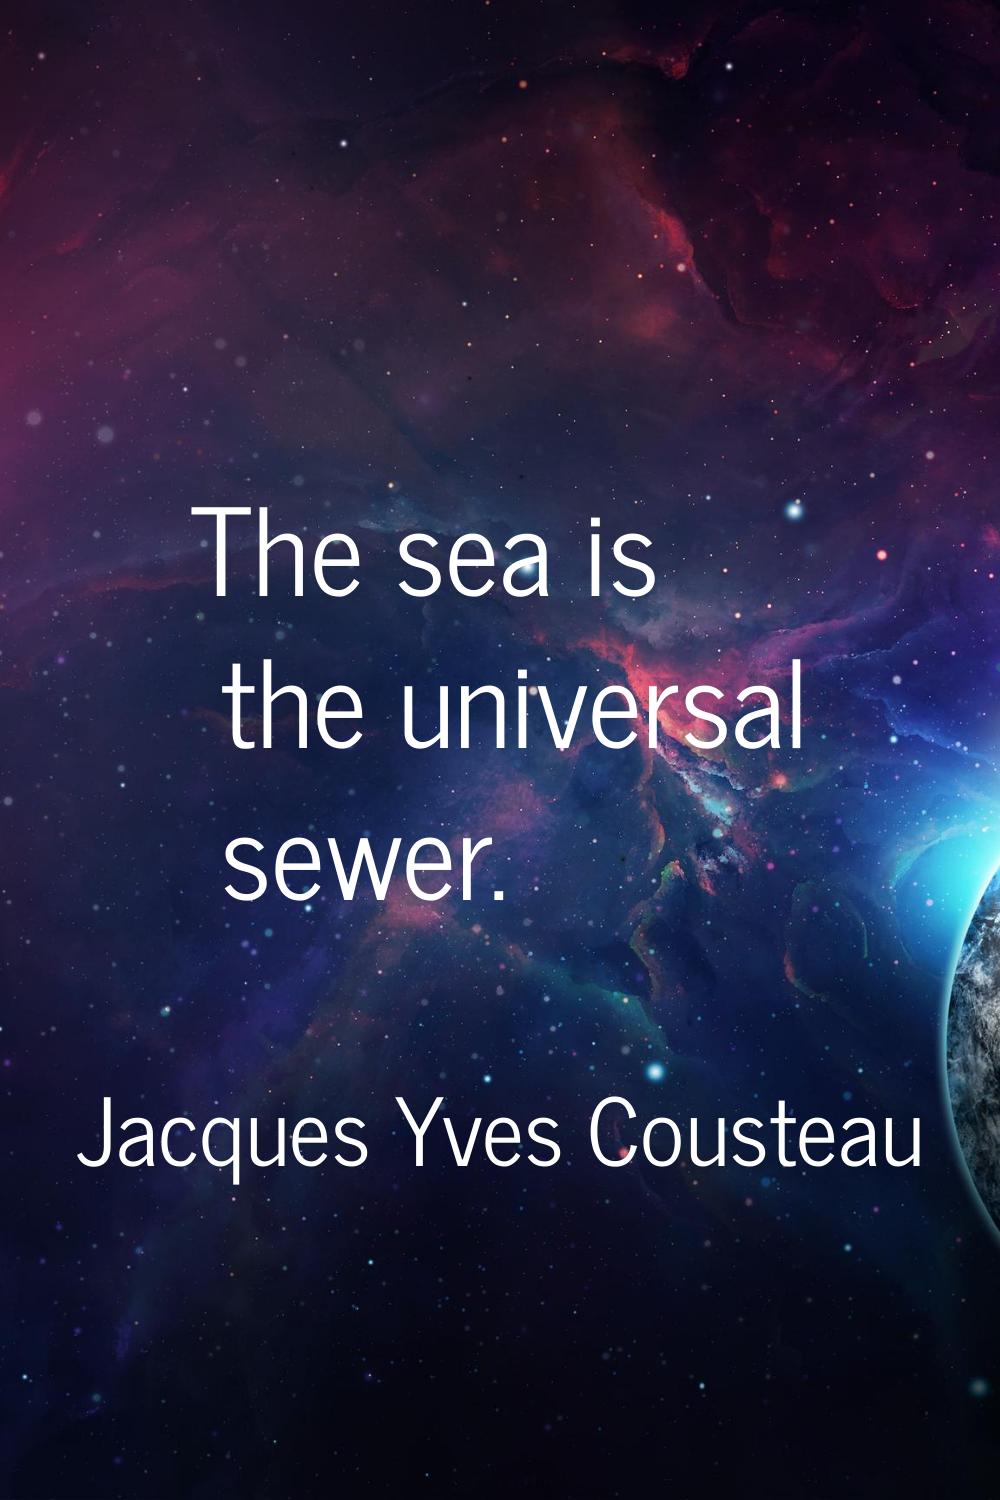 The sea is the universal sewer.